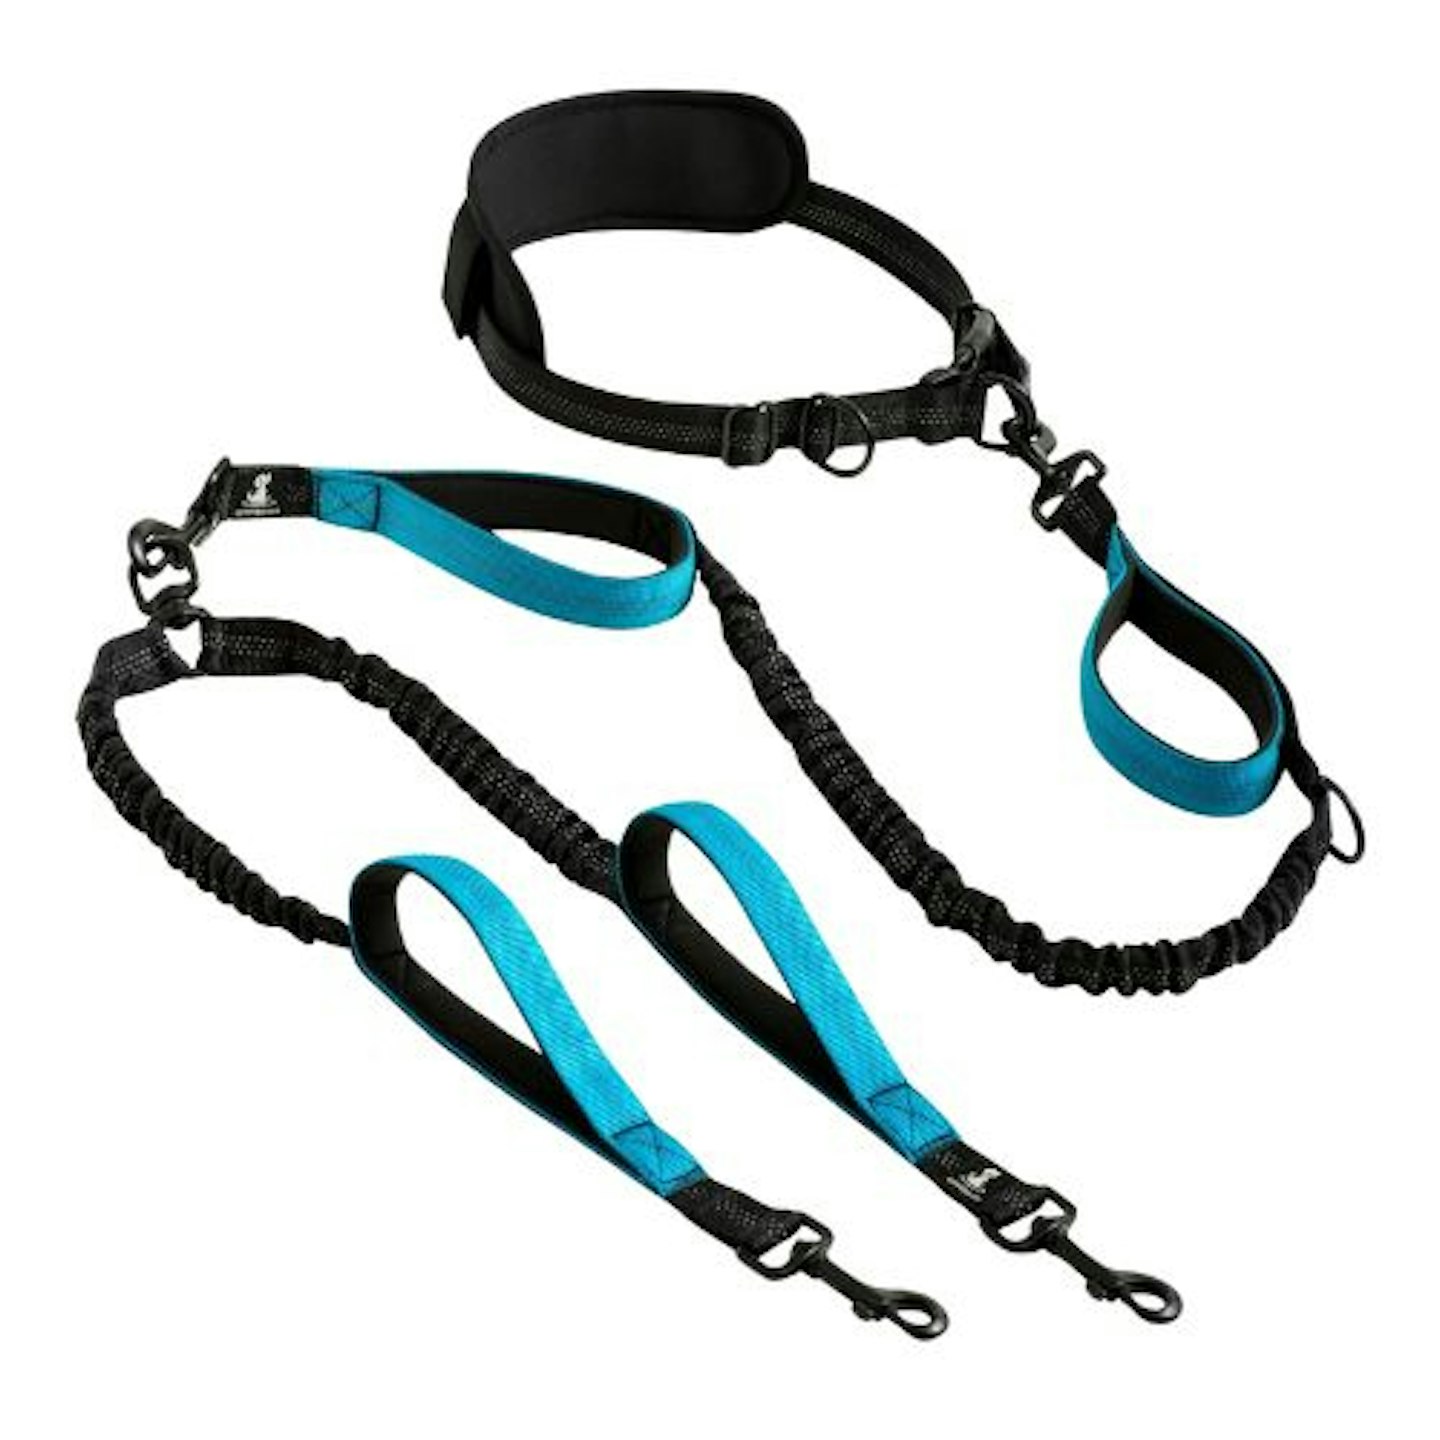 SparklyPets Hands-Free Double Dog Lead Splitter